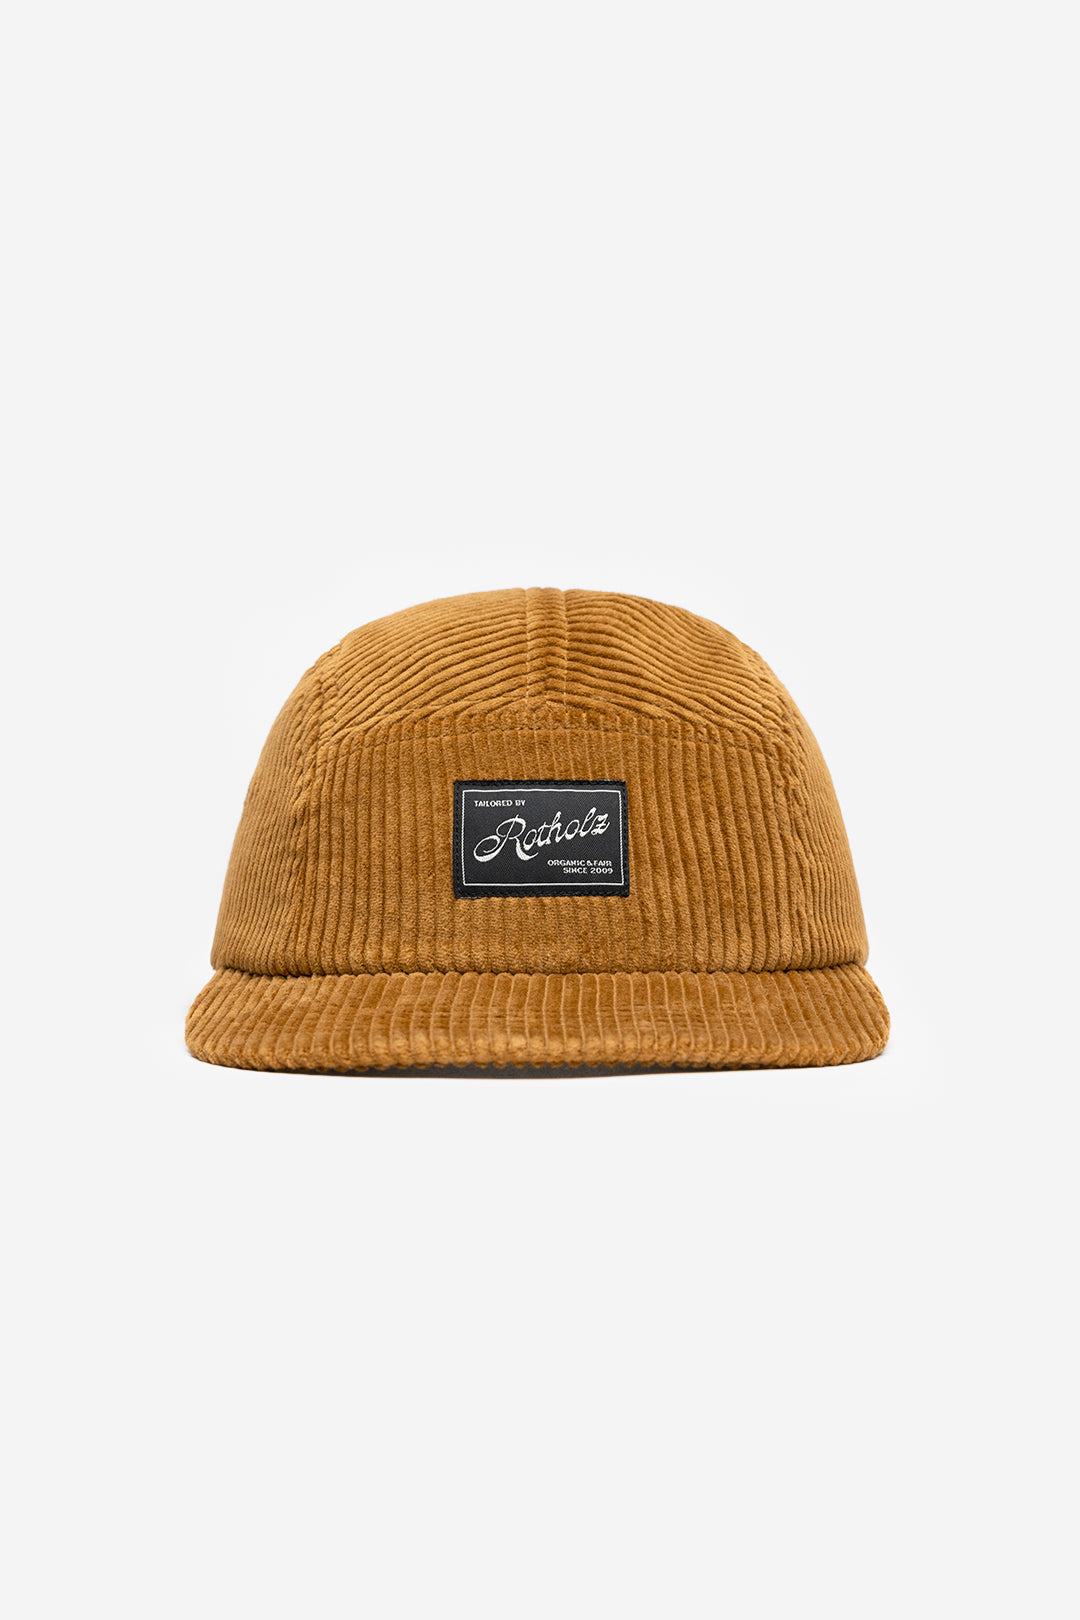 Toffee-colored 5-panel cord cap made from 100% organic cotton from Rotholz